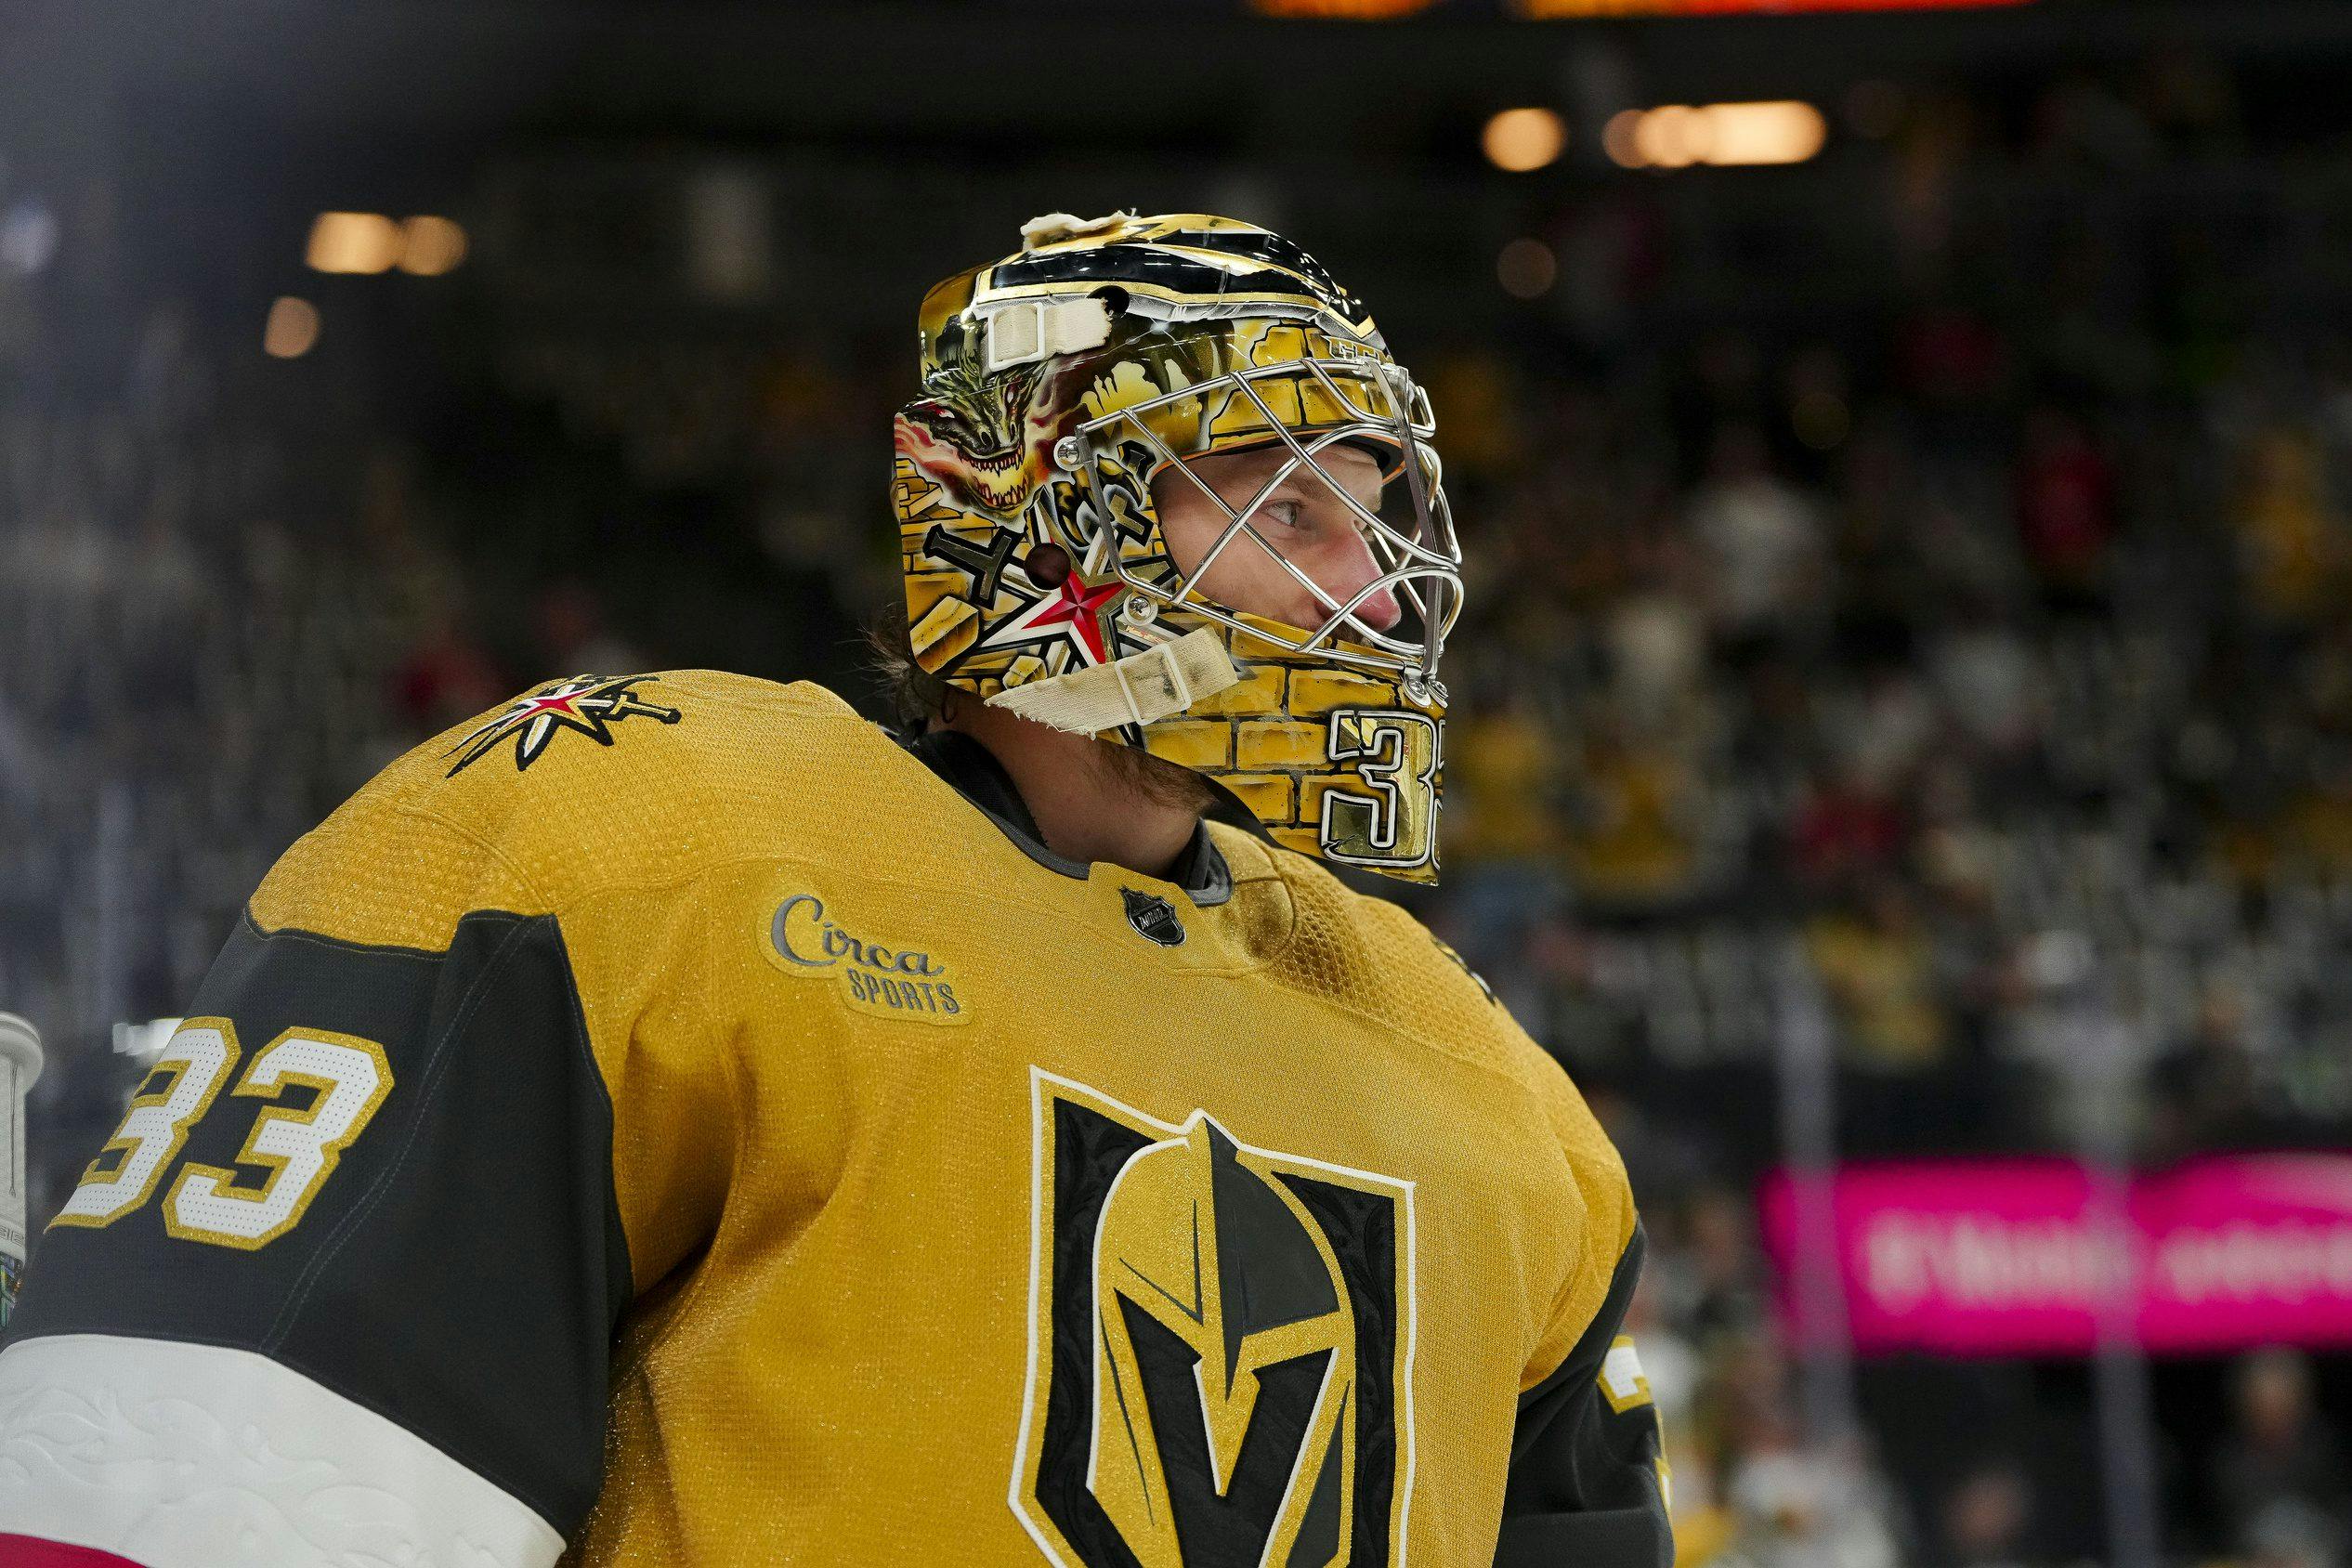 Betway starting goalie bet of the day: Bet on the Florida Panthers to heavily test Adin Hill again in game two 